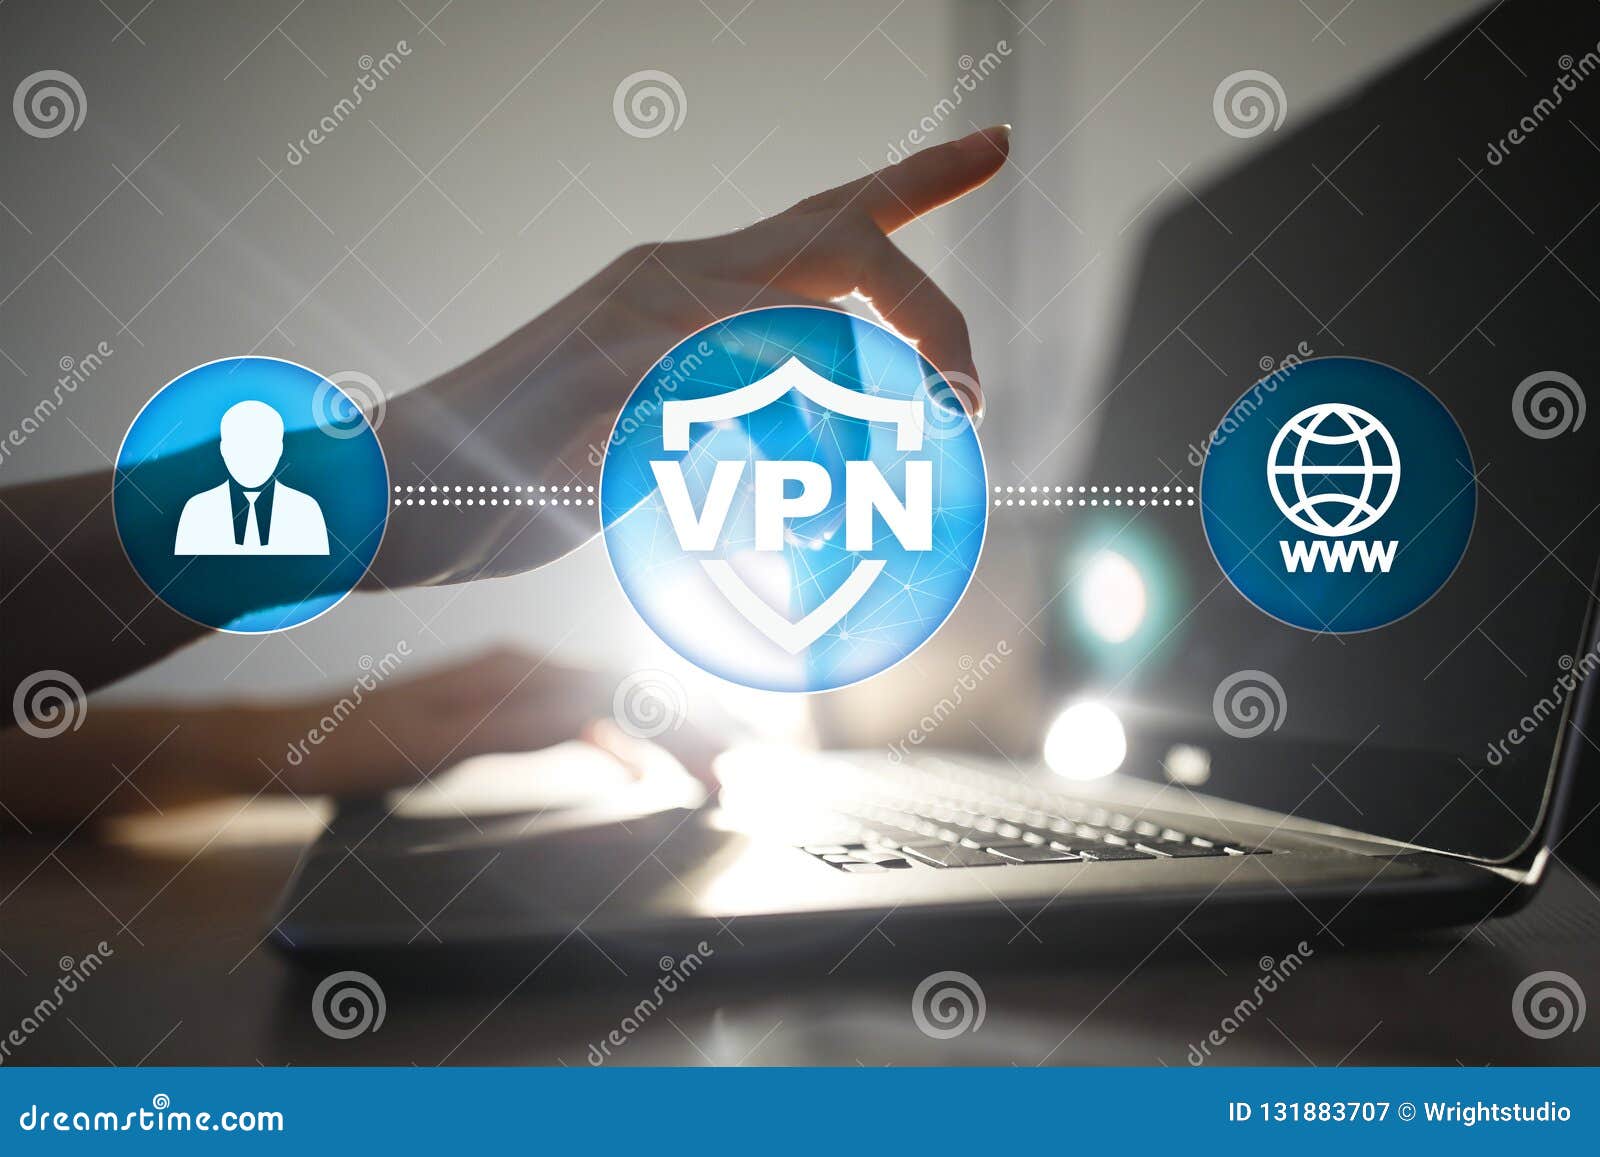 vpn virtual private network protocol. cyber security and privacy connection technology. anonymous internet.